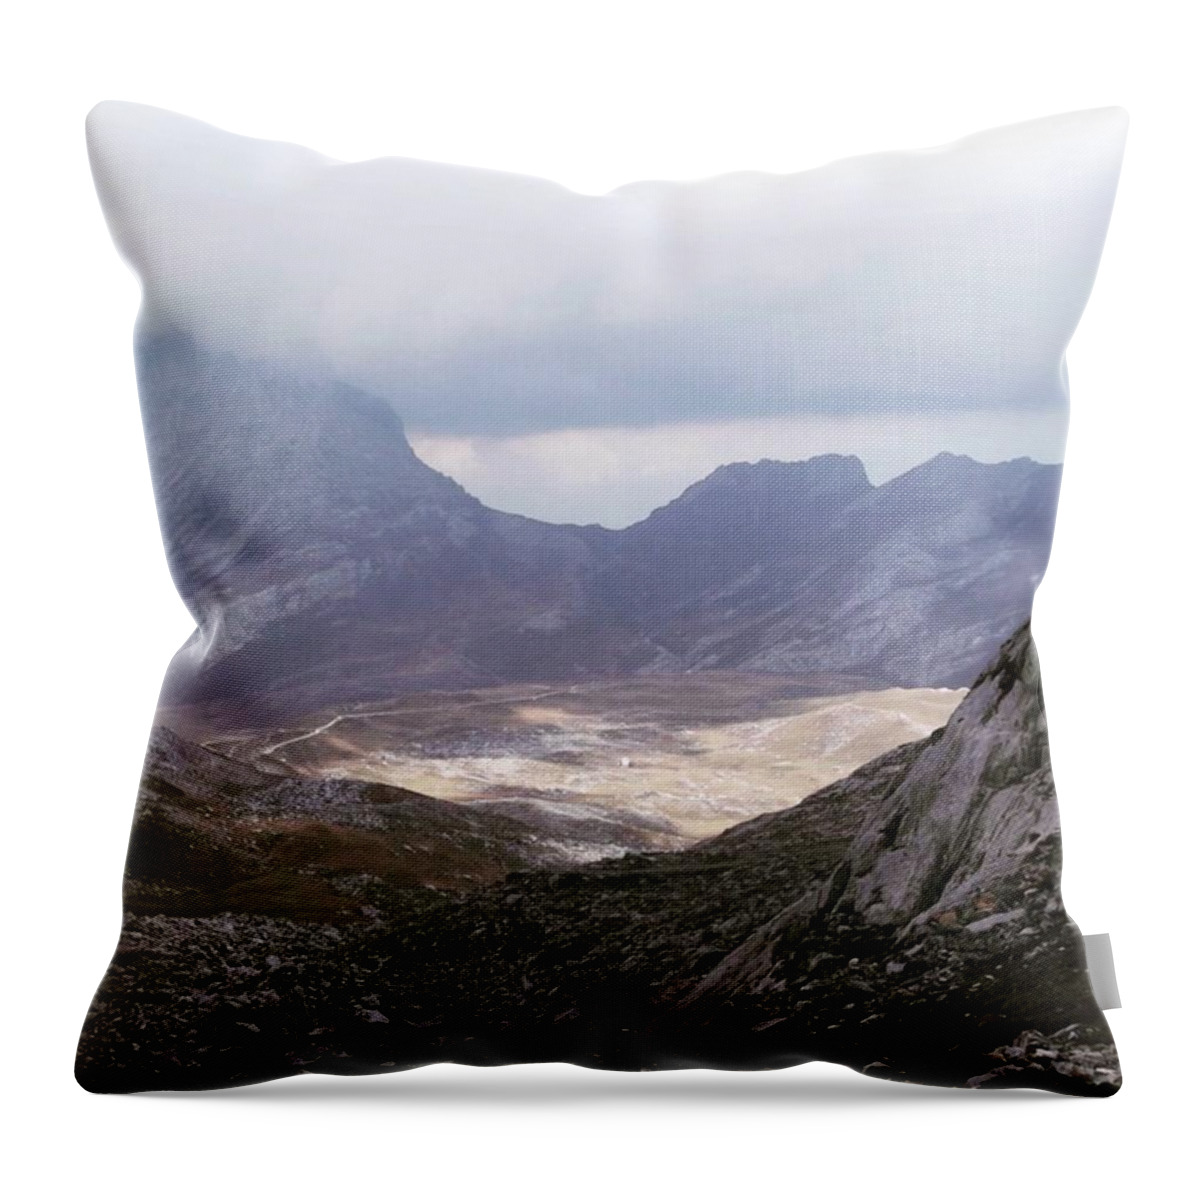 Mountains Throw Pillow featuring the photograph Hiking In The Picos De Europa, Spain by Charlotte Cooper